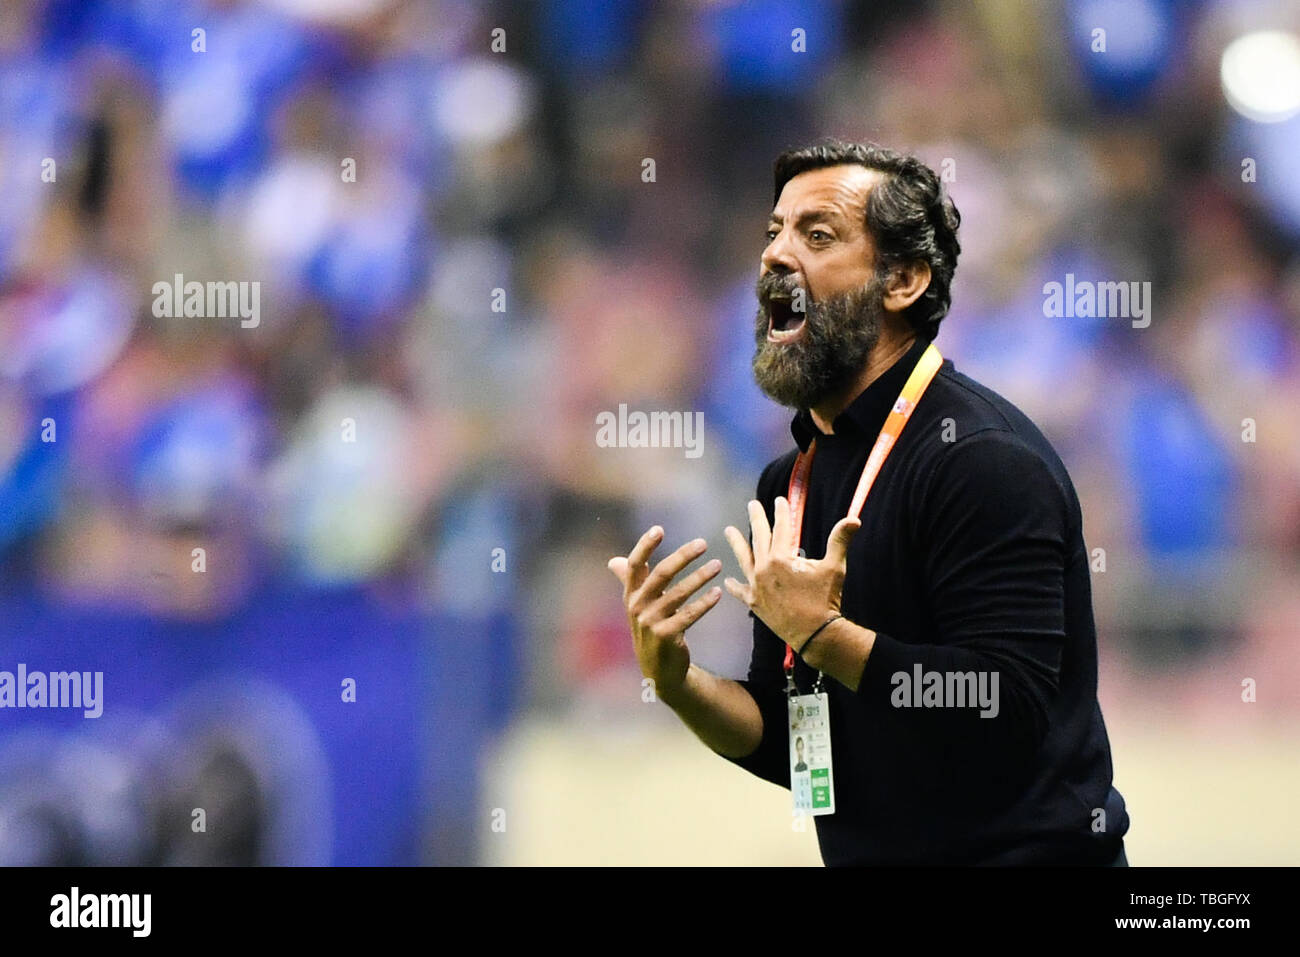 Head coach Quique Sanchez Flores of Shanghai Greenland Shenhua shouts instructions to his players as they compete against Chongqing SWM in their 12th round match during the 2019 Chinese Football Association Super League (CSL) in Shanghai, China, 1 June 2019.  Shanghai Greenland Shenhua played draw to Chongqing SWM 0-0. Stock Photo